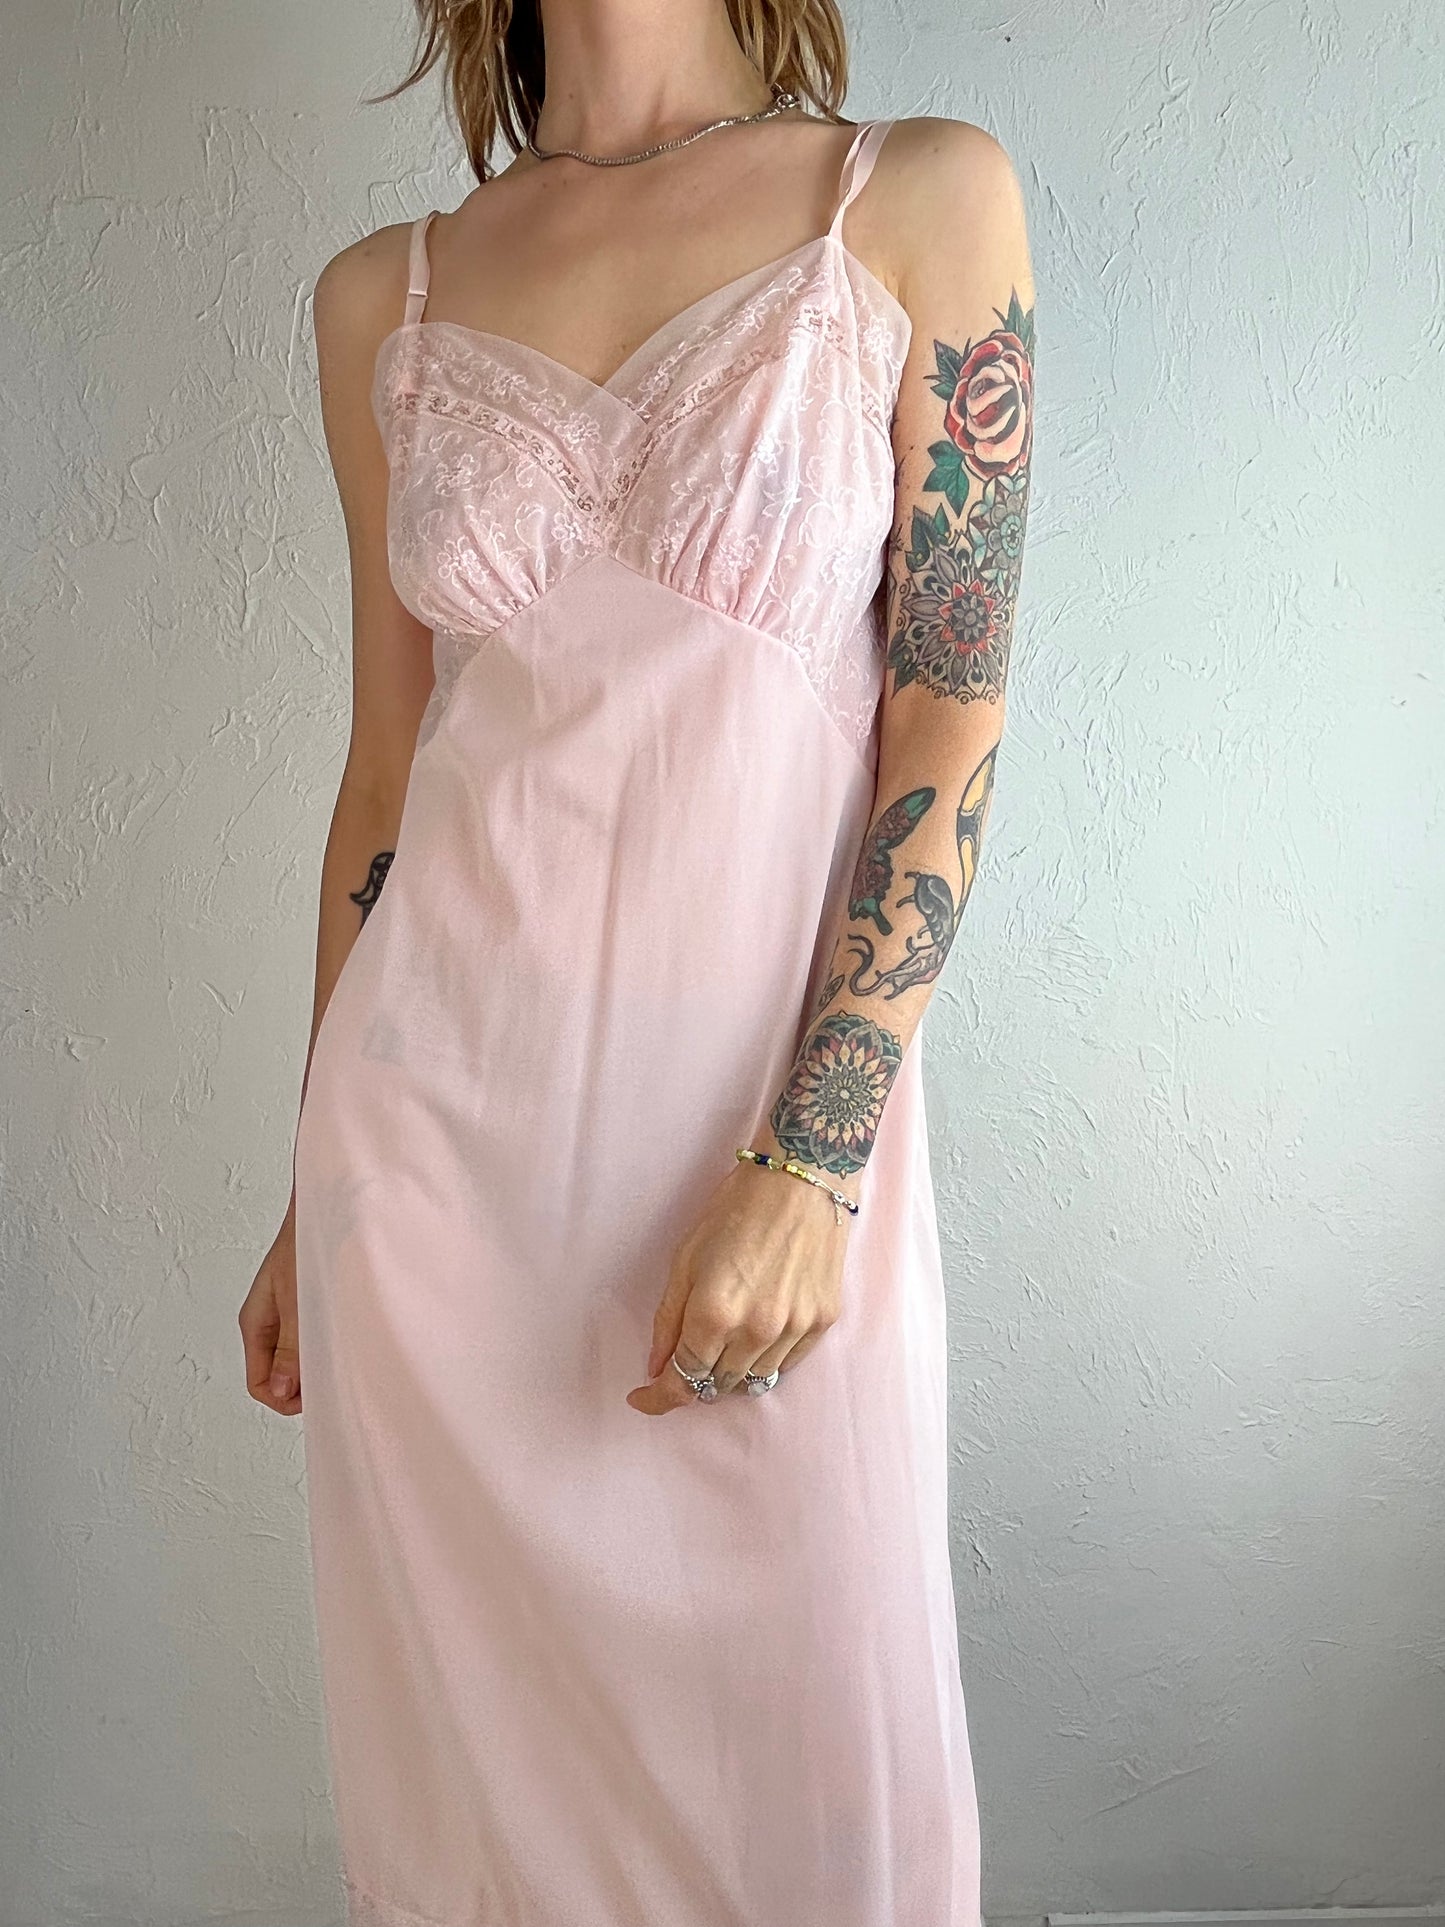 70s 80s Sheer Pink Lacey Slip Dress / Small